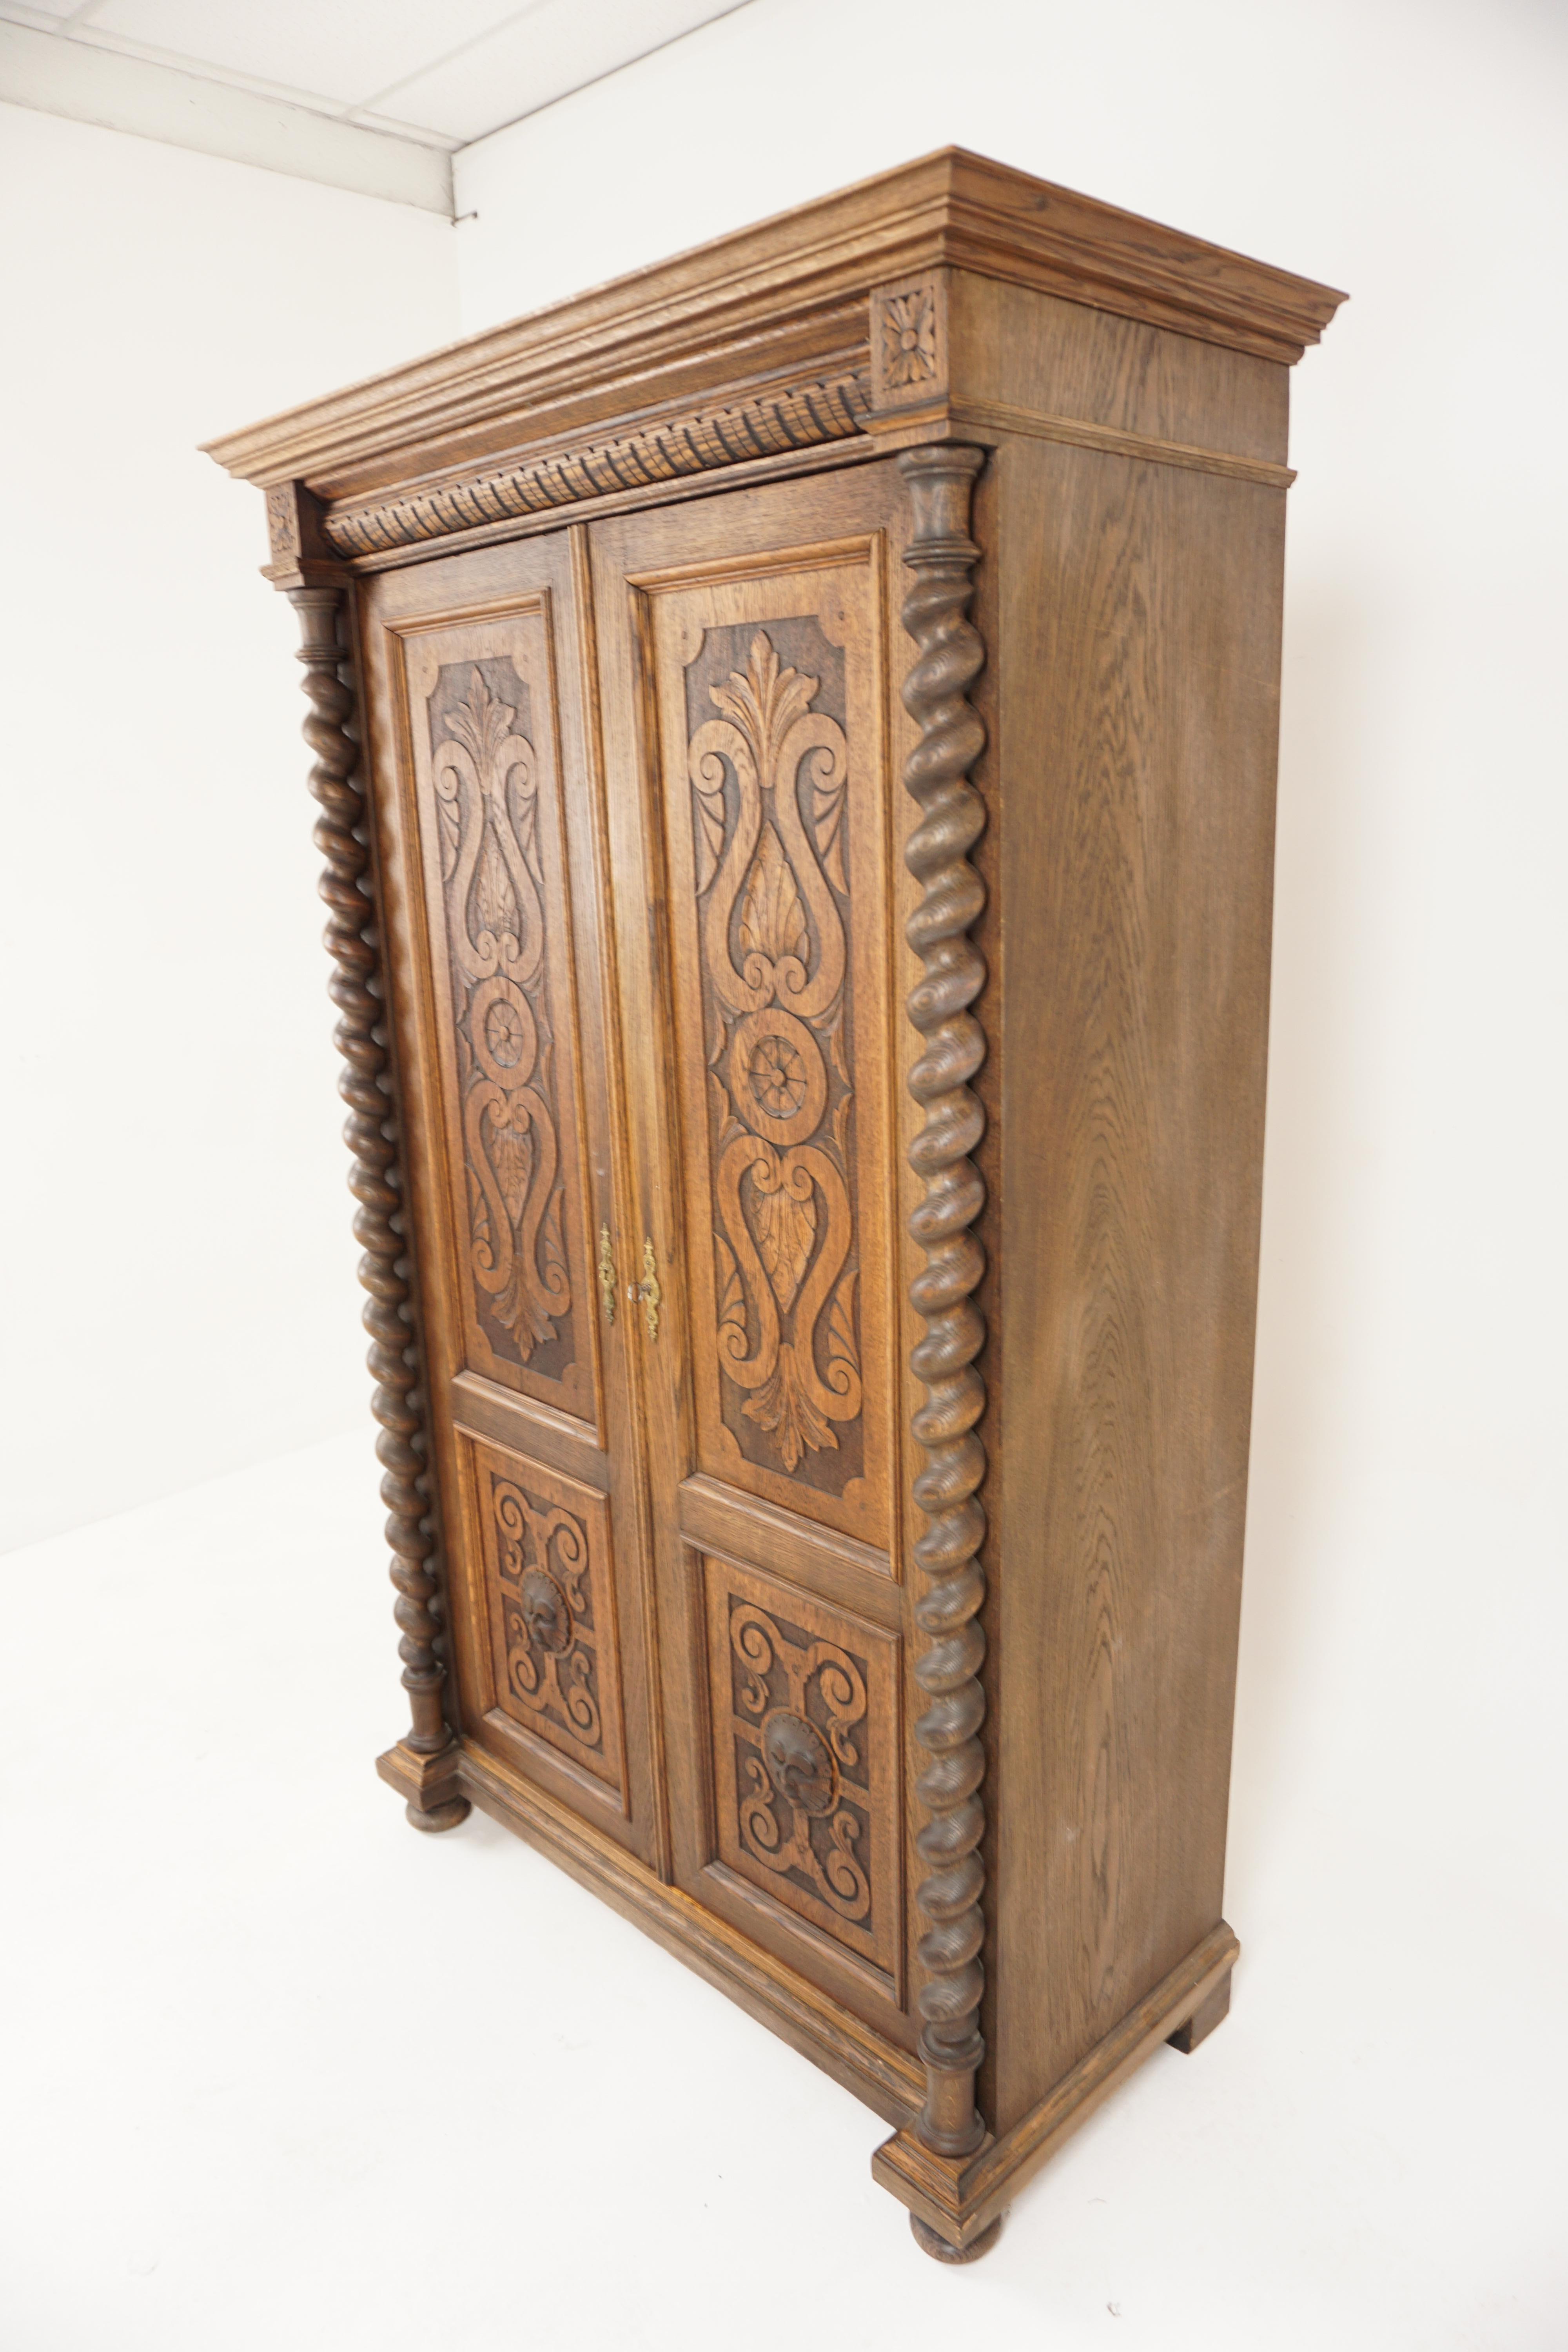 Victorian Carved Oak Hall Robe Barley Twist Closet Fitted Interior, Scotland 1880, H1172

Scotland 1880
Solid Oak
Original Finish
With projecting moulded cornice on top
Carved frieze underneath
With tow carved panelled doors with scrolling